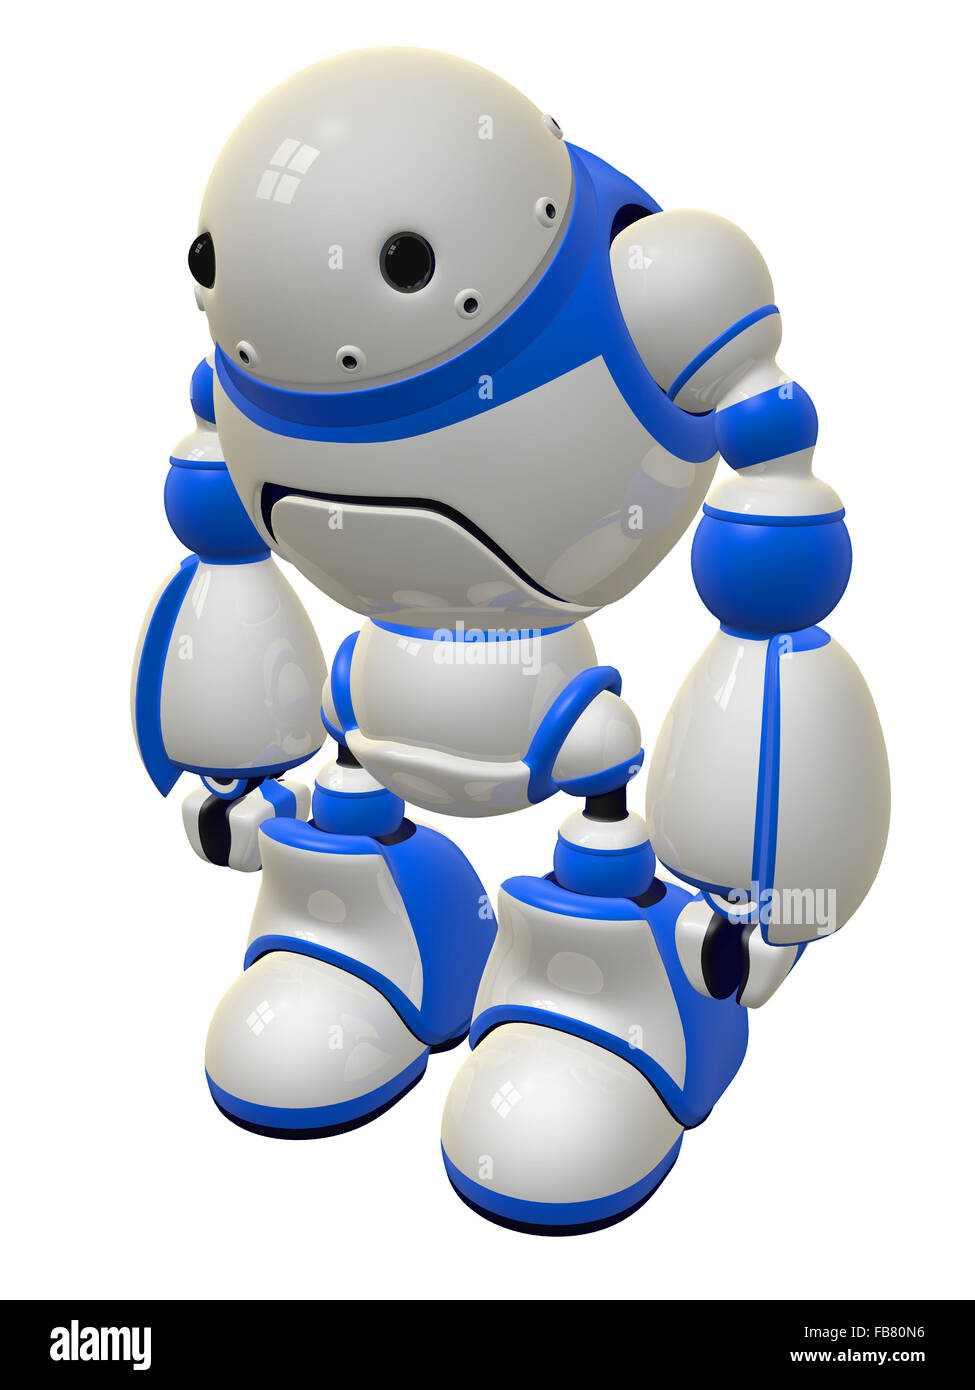 Security robot standing ready to defend. But who would want to fight a robot this cute?. Stock Photo